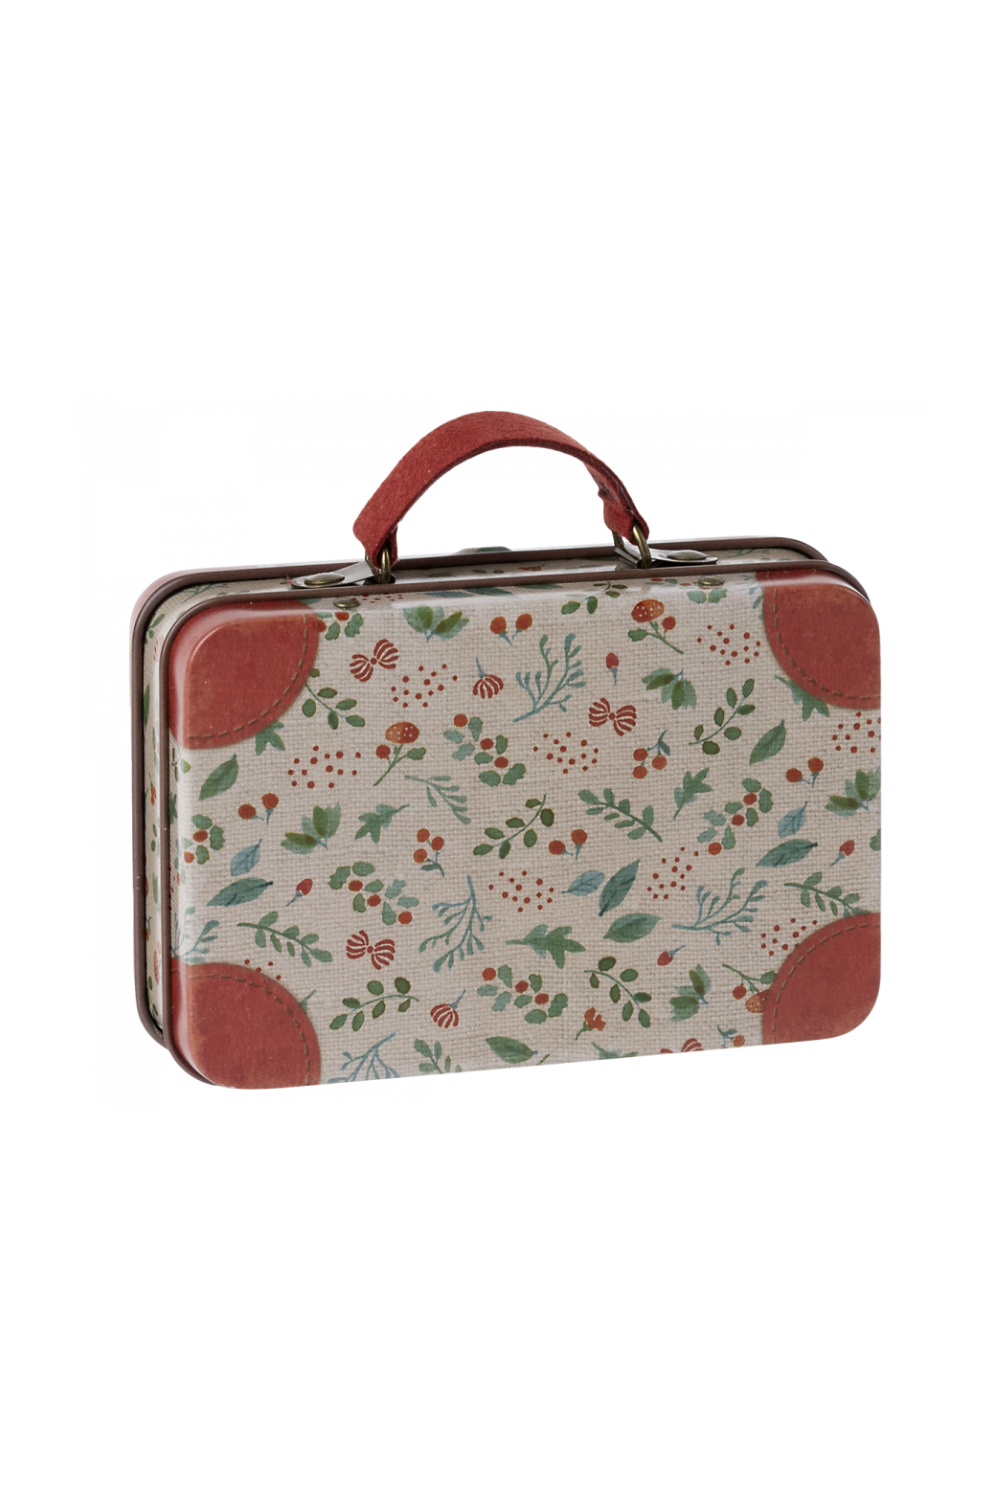 Holly Metal Suitcase: Popular Maileg Collectible with New Print